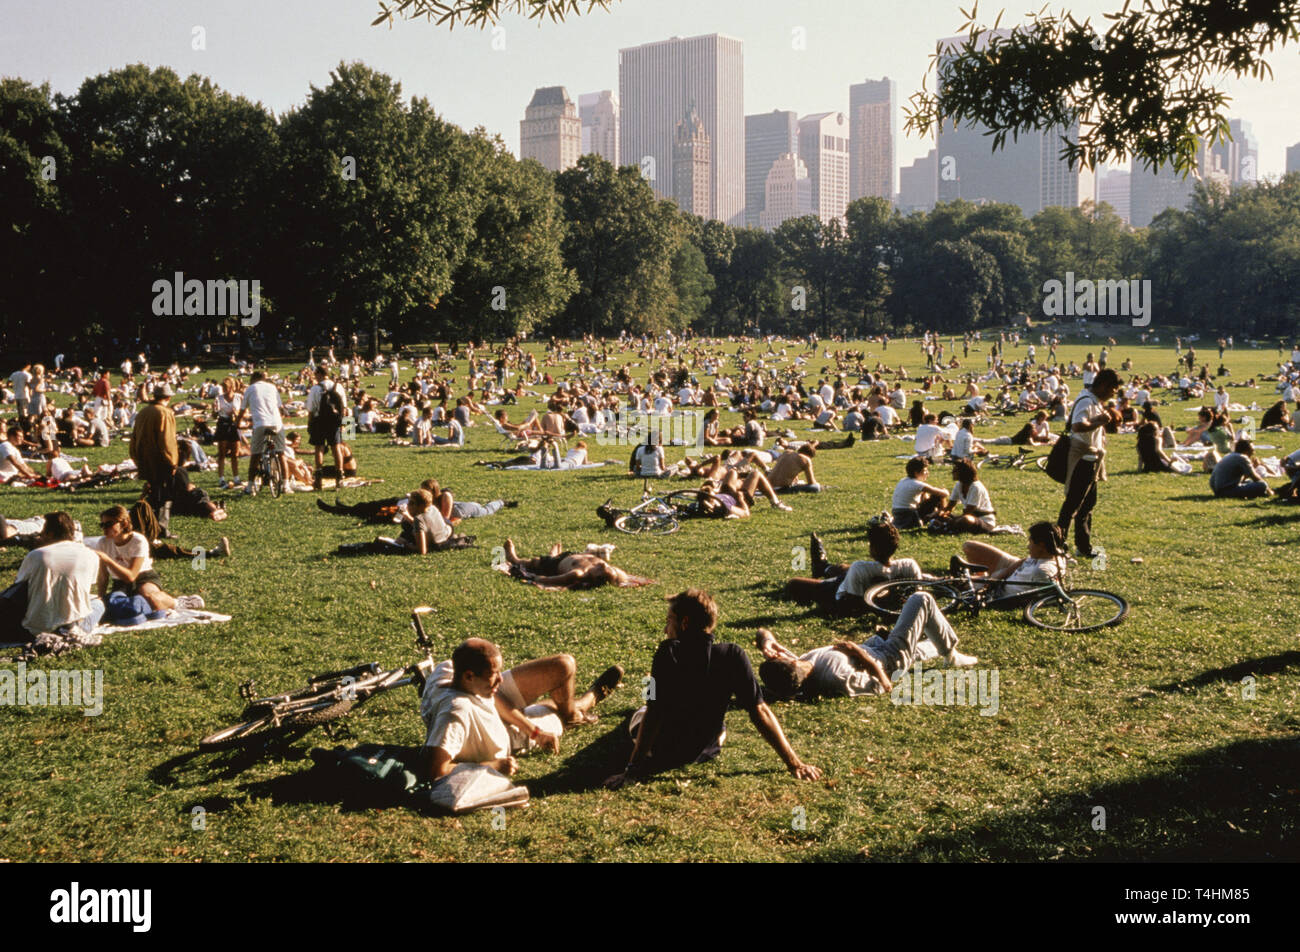 Sunbathers on Sheep Meadow with Skyline in background, Central Park ...